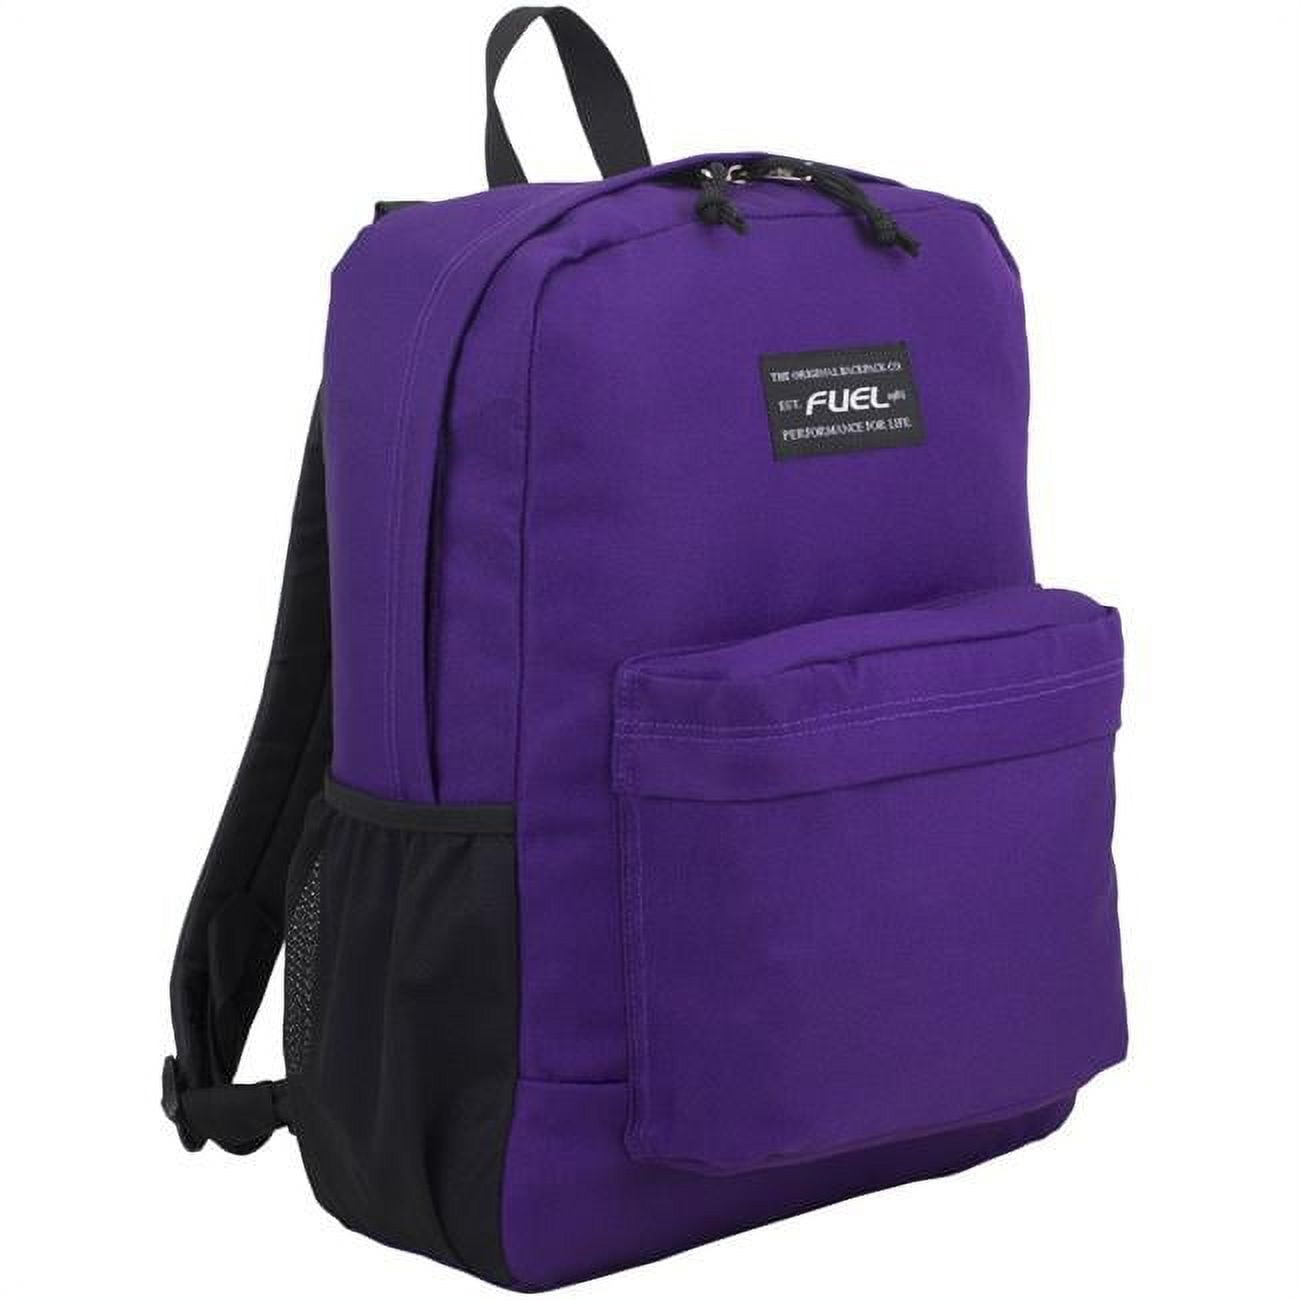 2317667 Cruise Backpack, Purple - Case Of 12 - 12 Per Pack